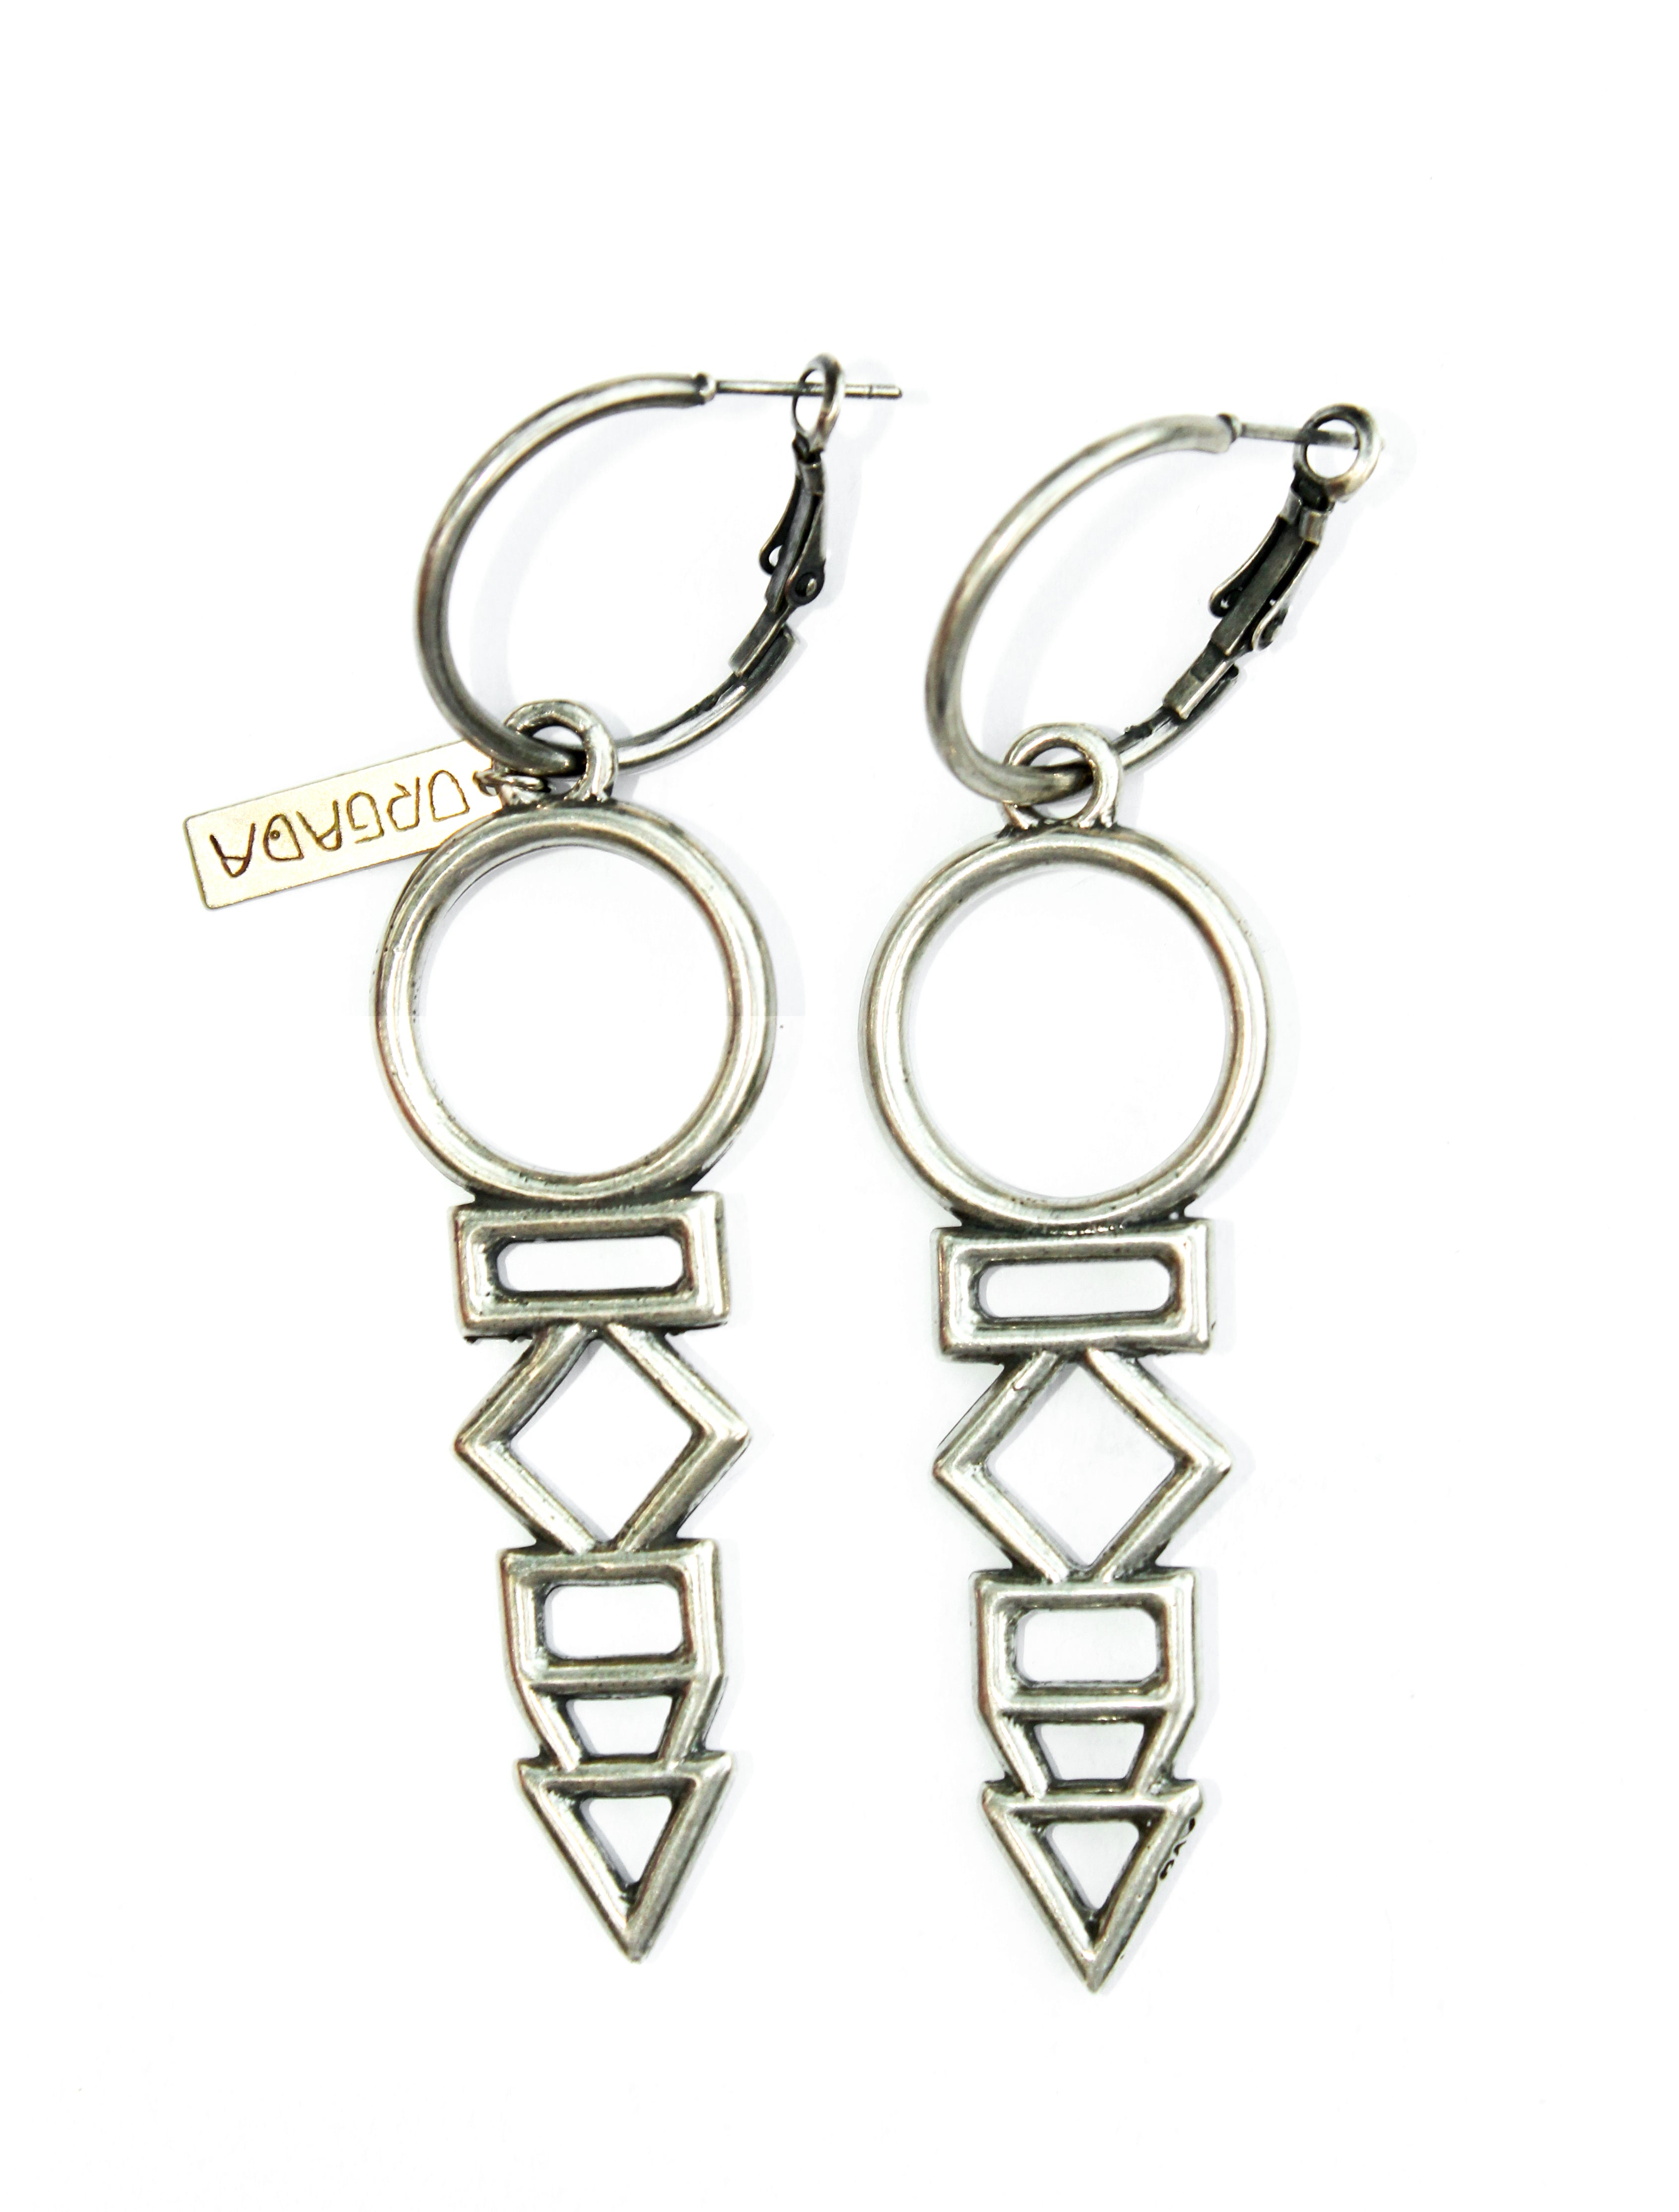 Stractura Earrings